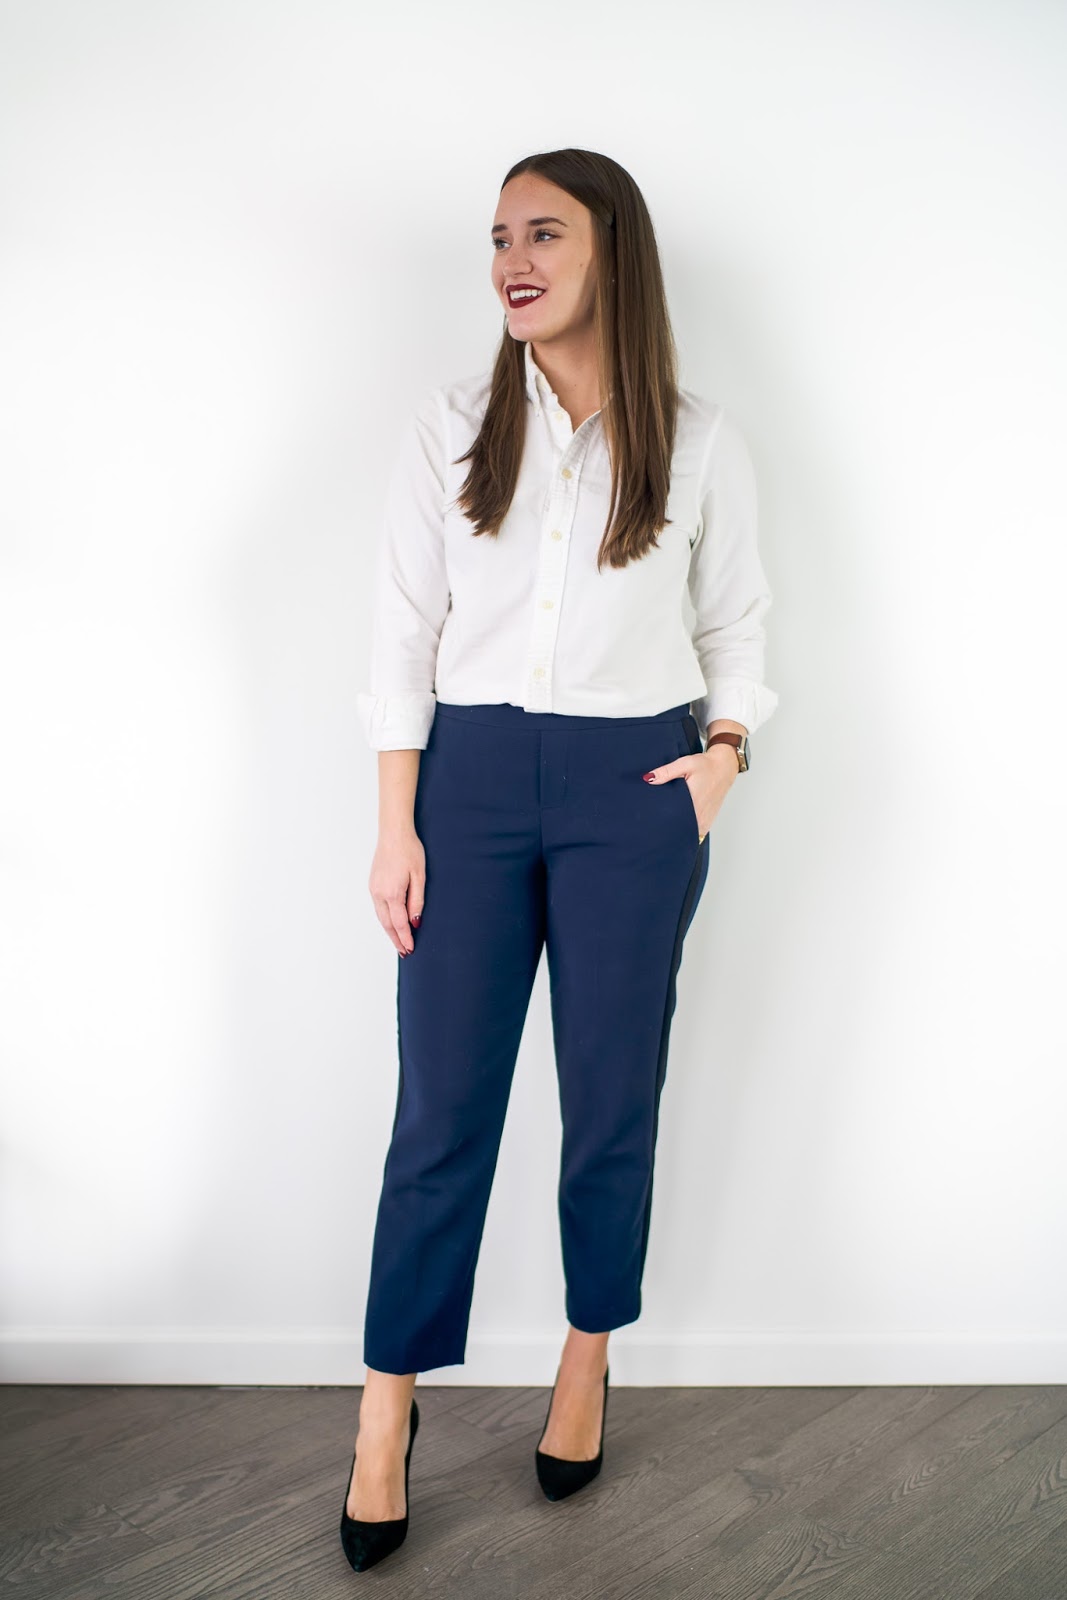 Comfy Work Pants That Feel Like Sweat Pants, Connecticut Fashion and  Lifestyle Blog